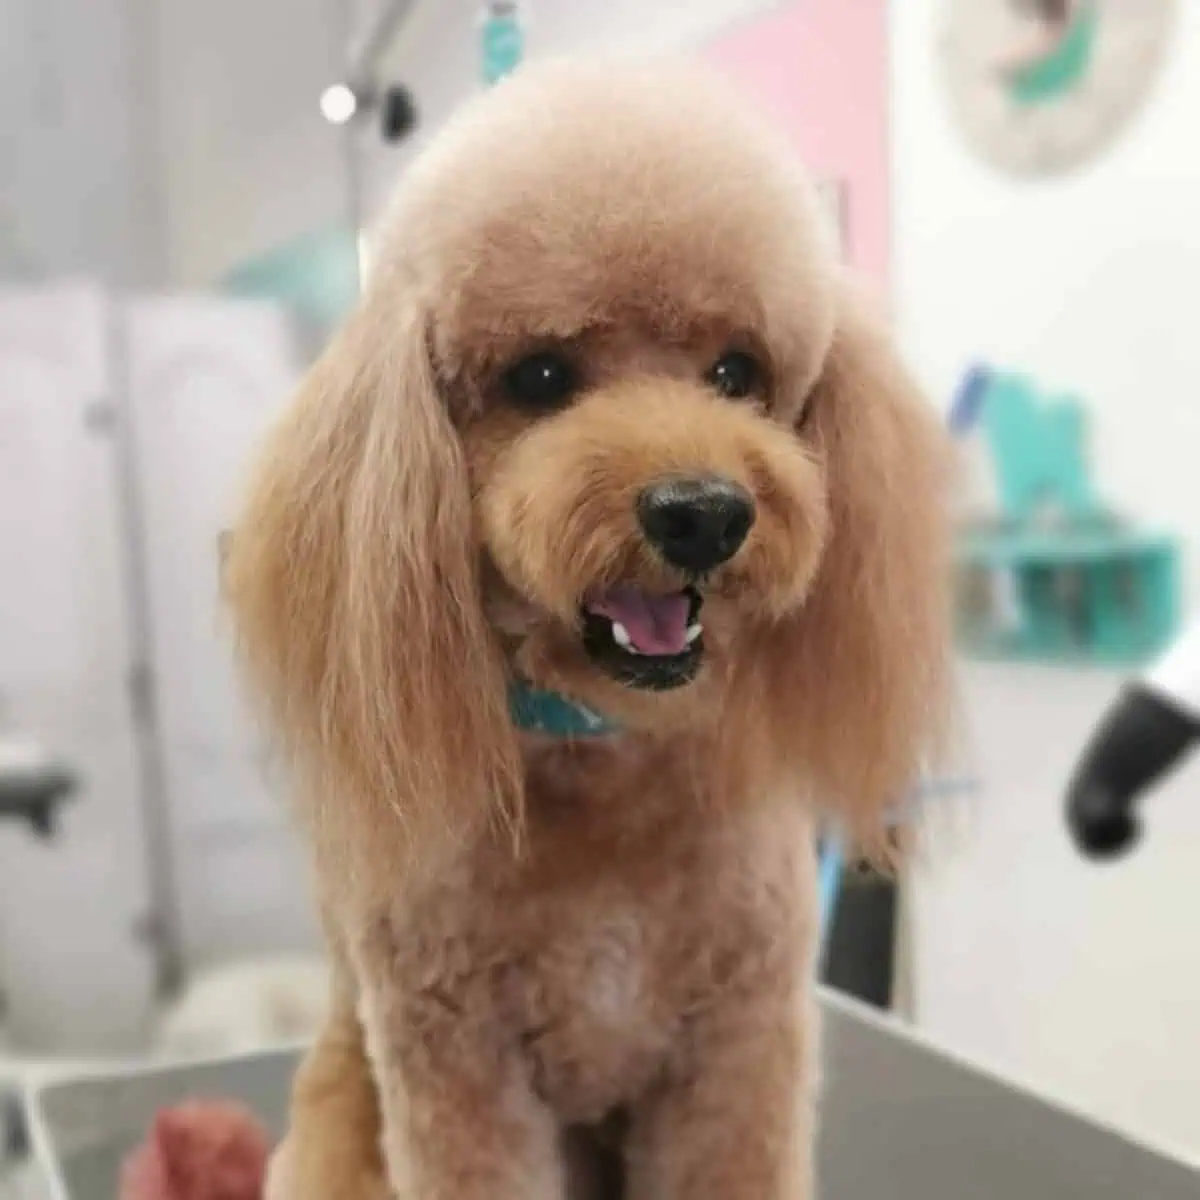 relieved Poodle after a grooming session